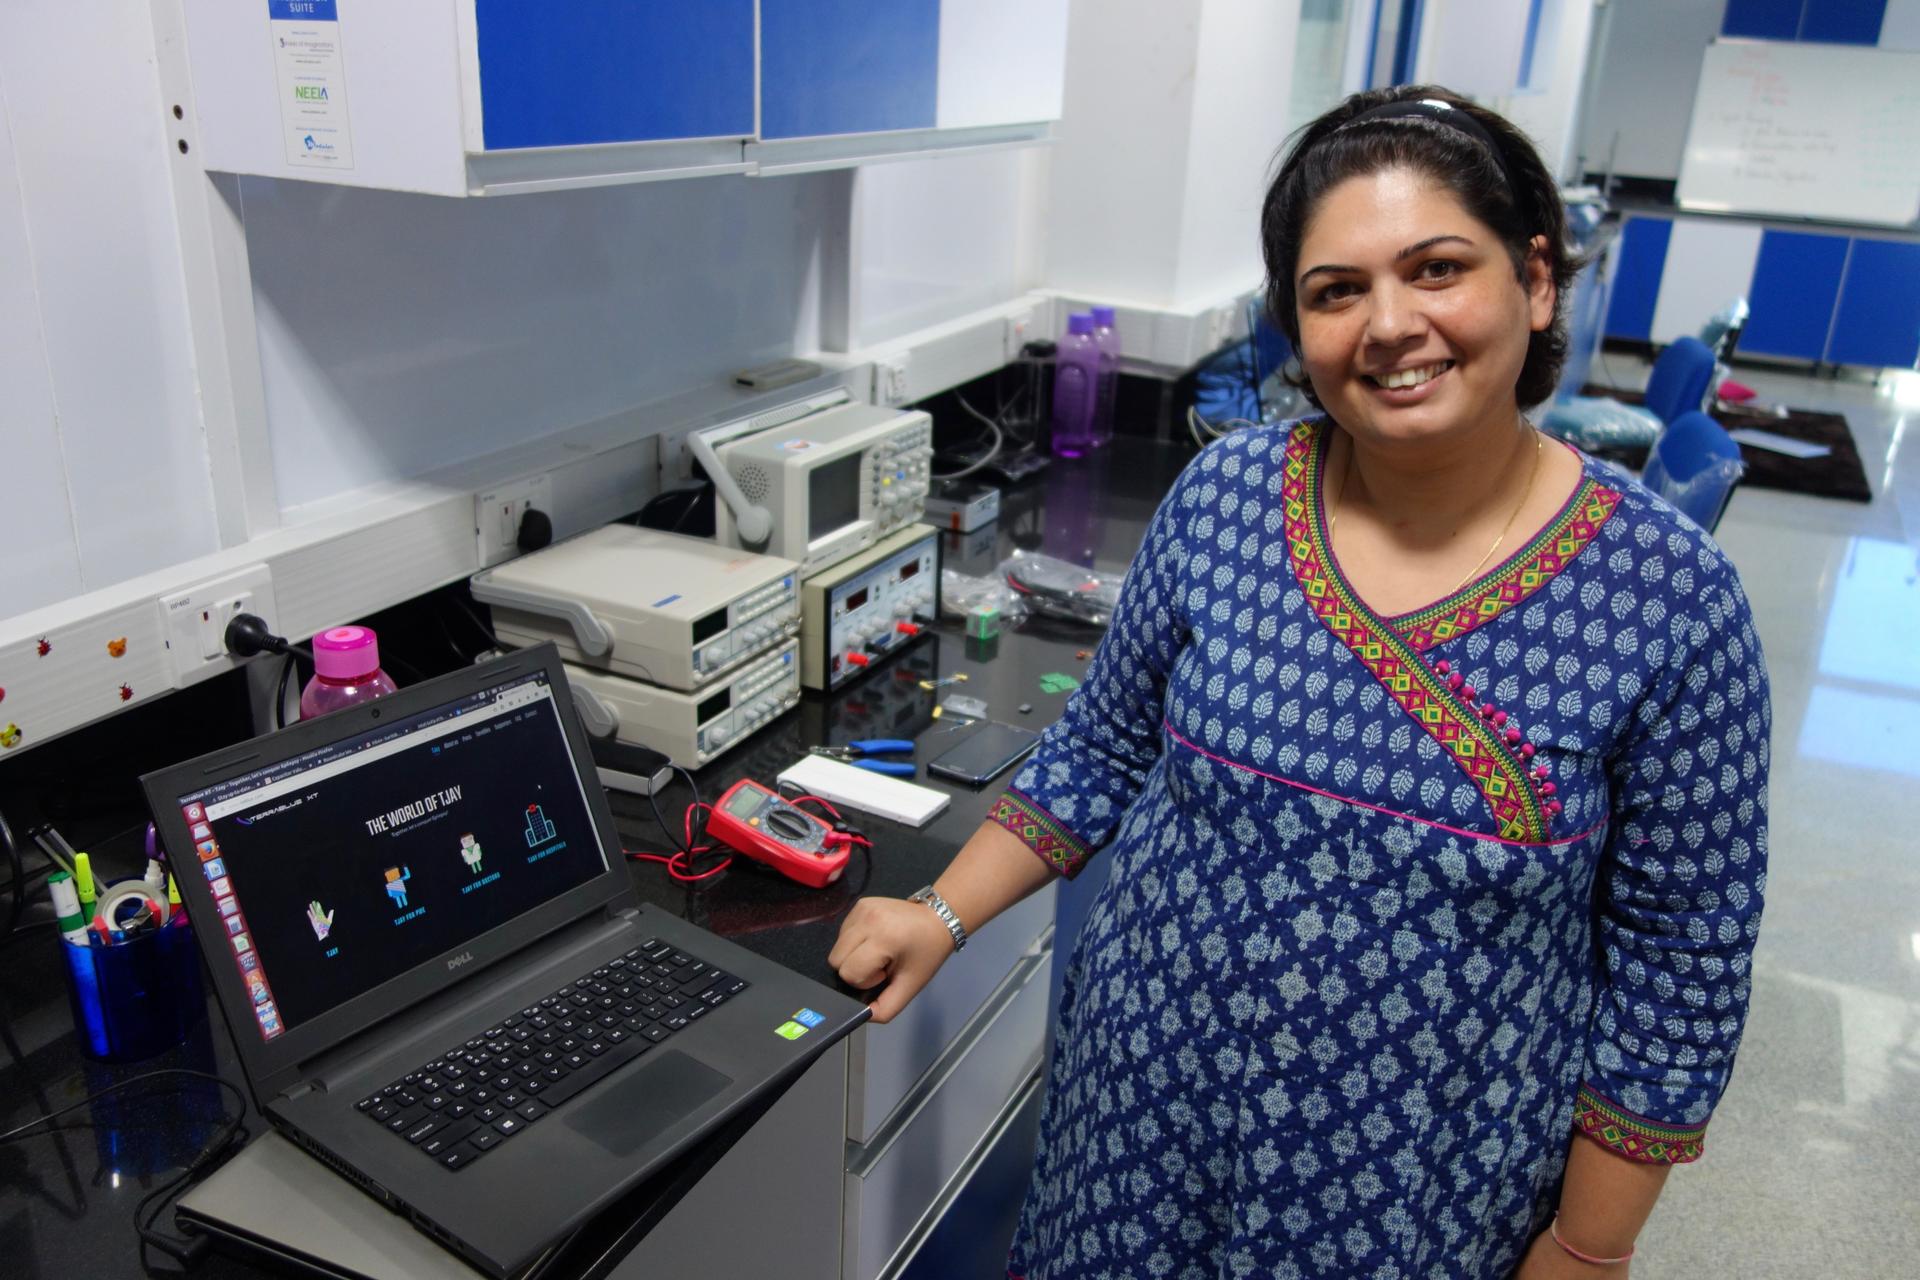 Rajlakshmi Borthakur's experience with her own child's epilepsy led her to start a company, making a glove with sensors that can read the body's electrical signals to predict when epileptic seizures will happen.